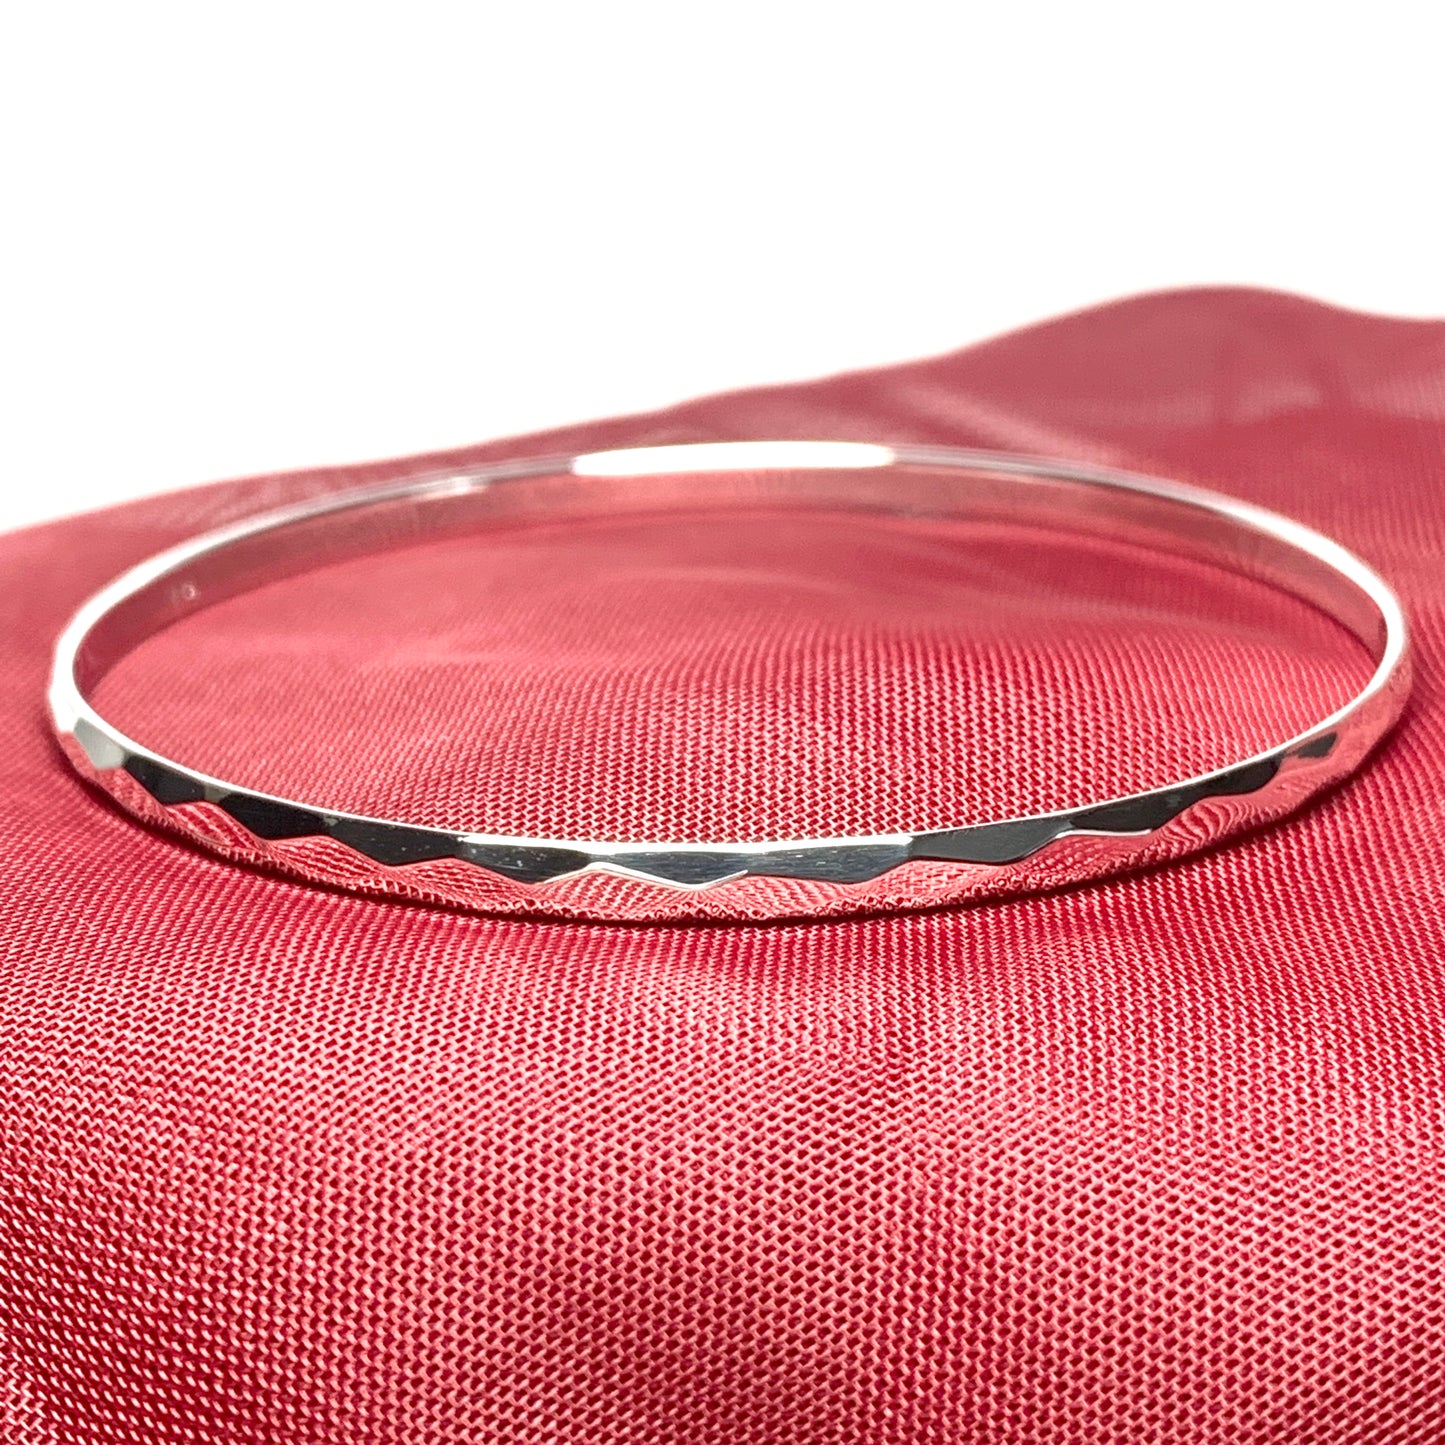 Solid round bangle 3 mm round patterned faceted sterling silver slave